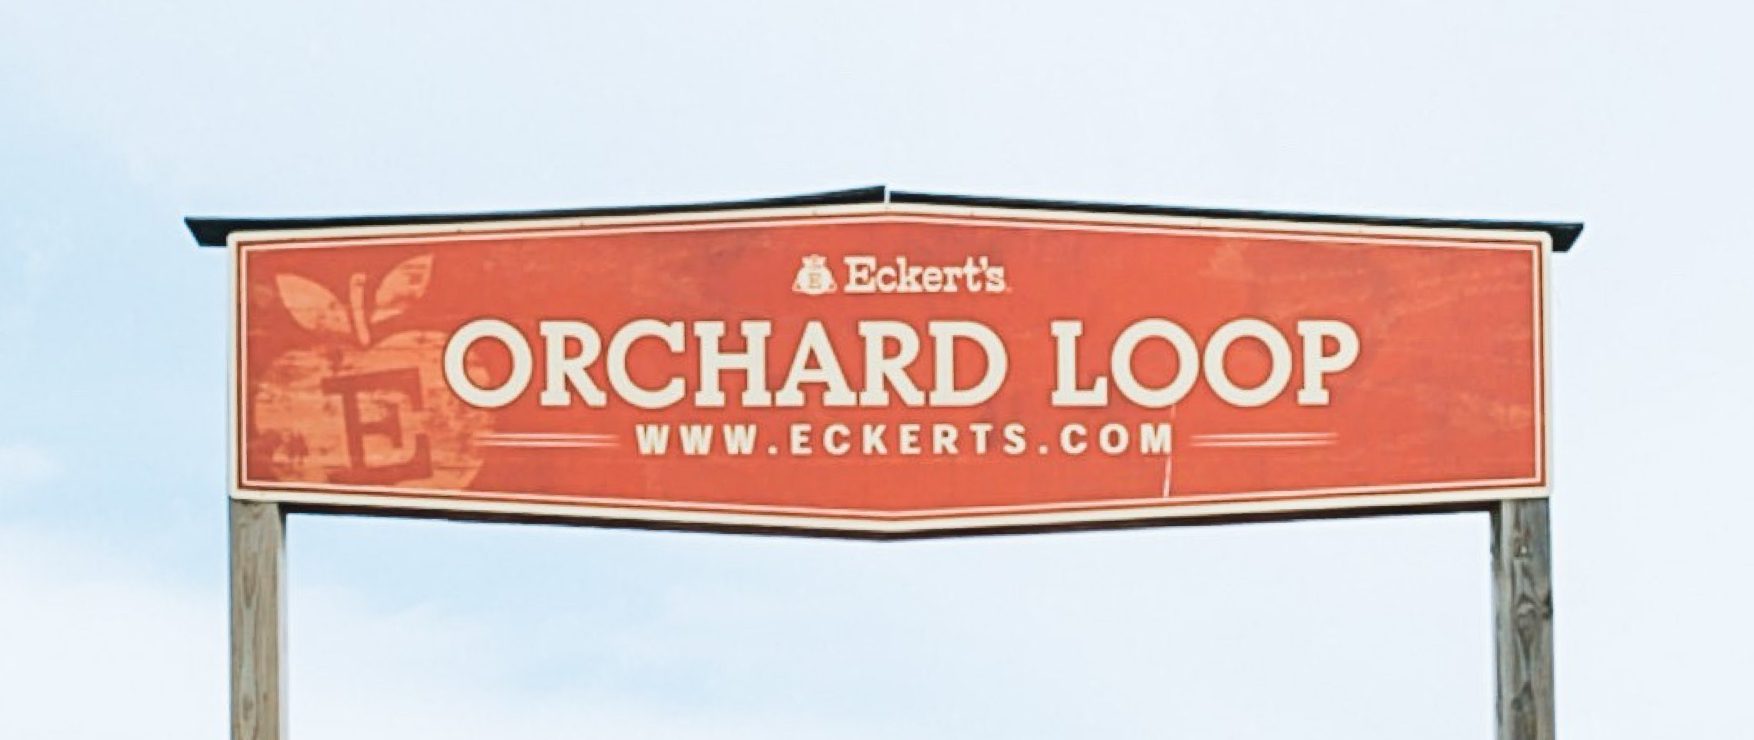 A picture of Eckert's orchard loop sign